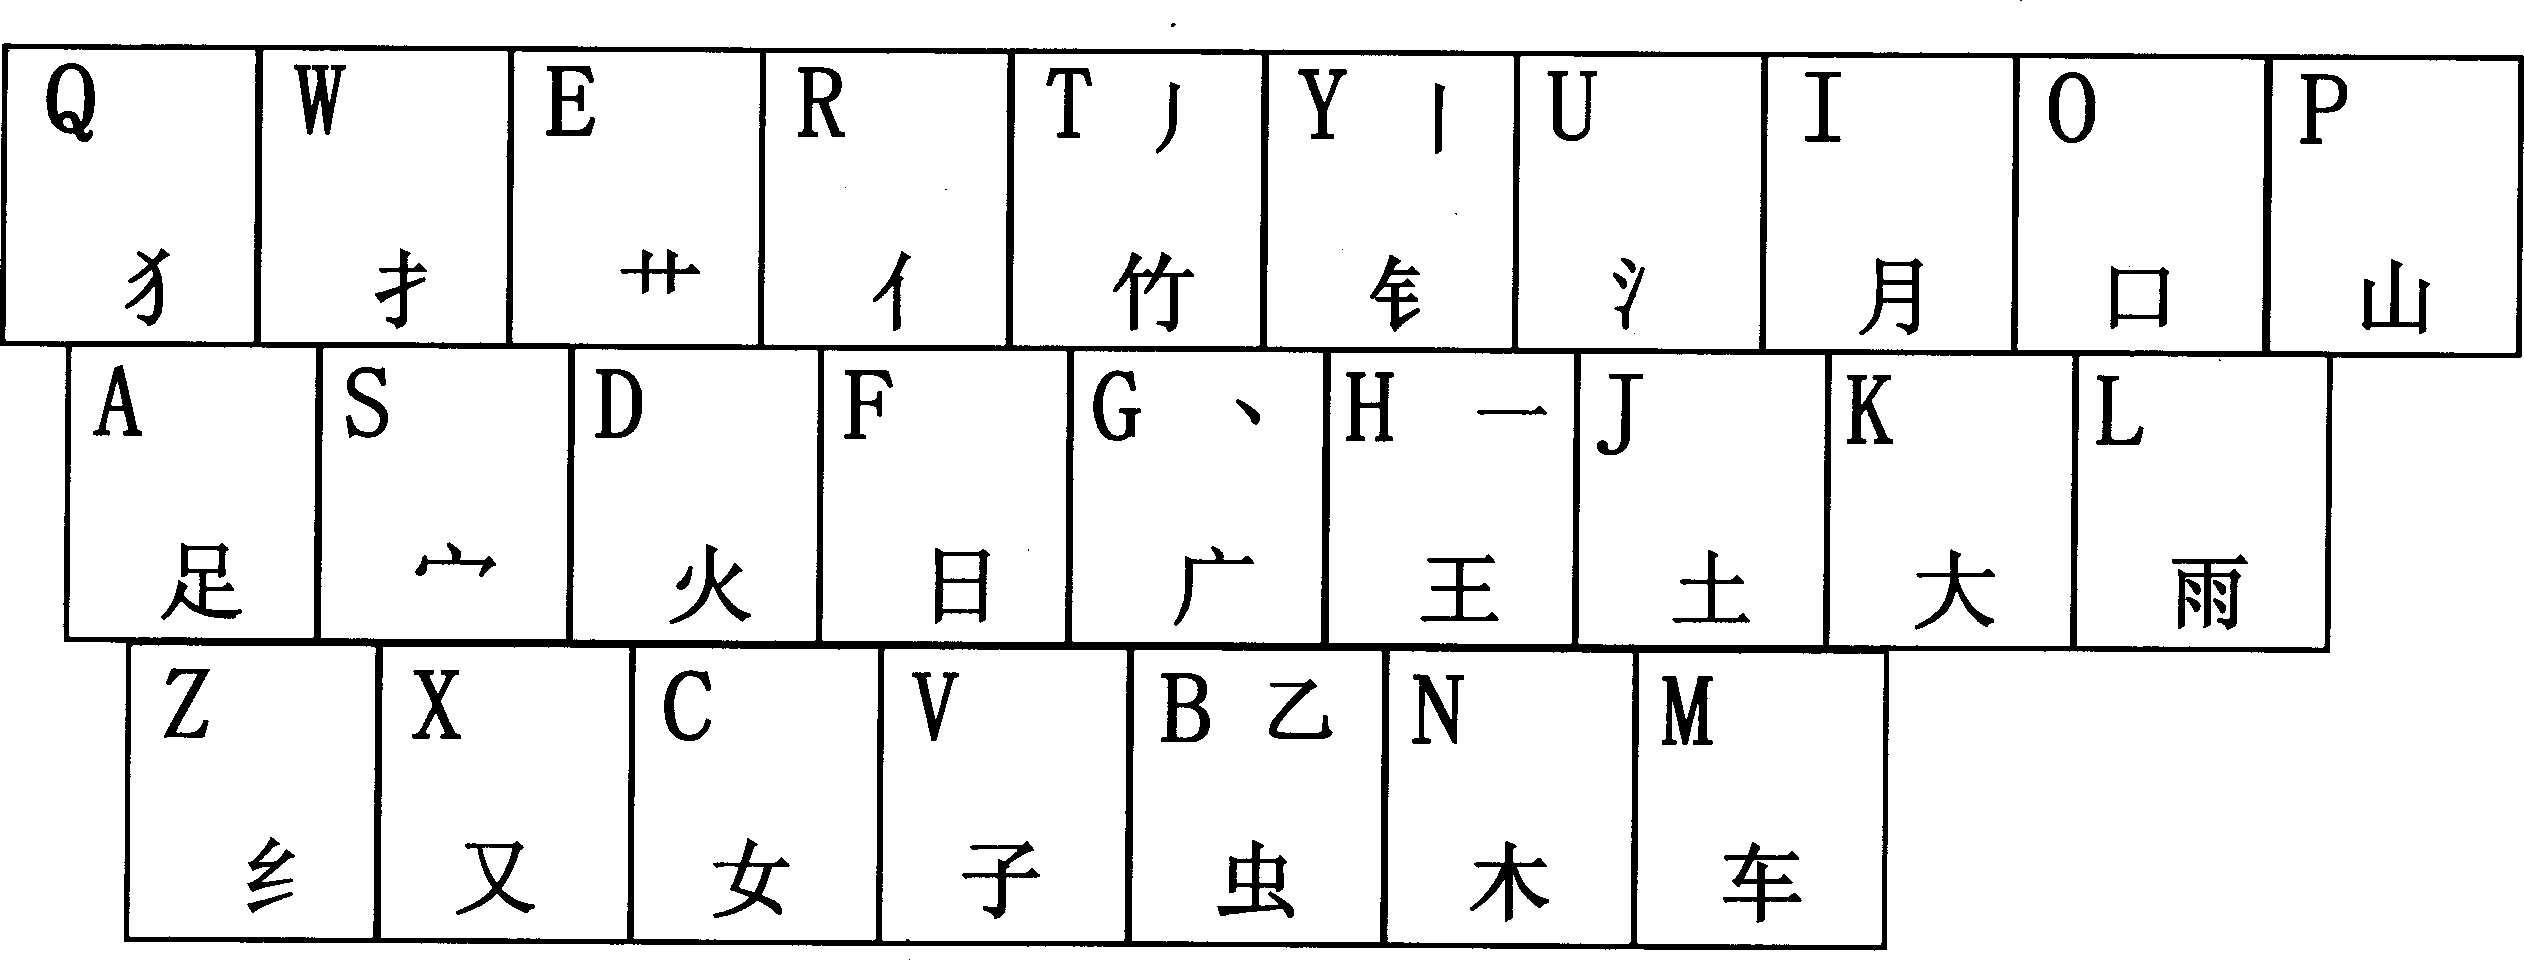 Intelligent shape-phonetic-digital multicode combined Chinese character input system